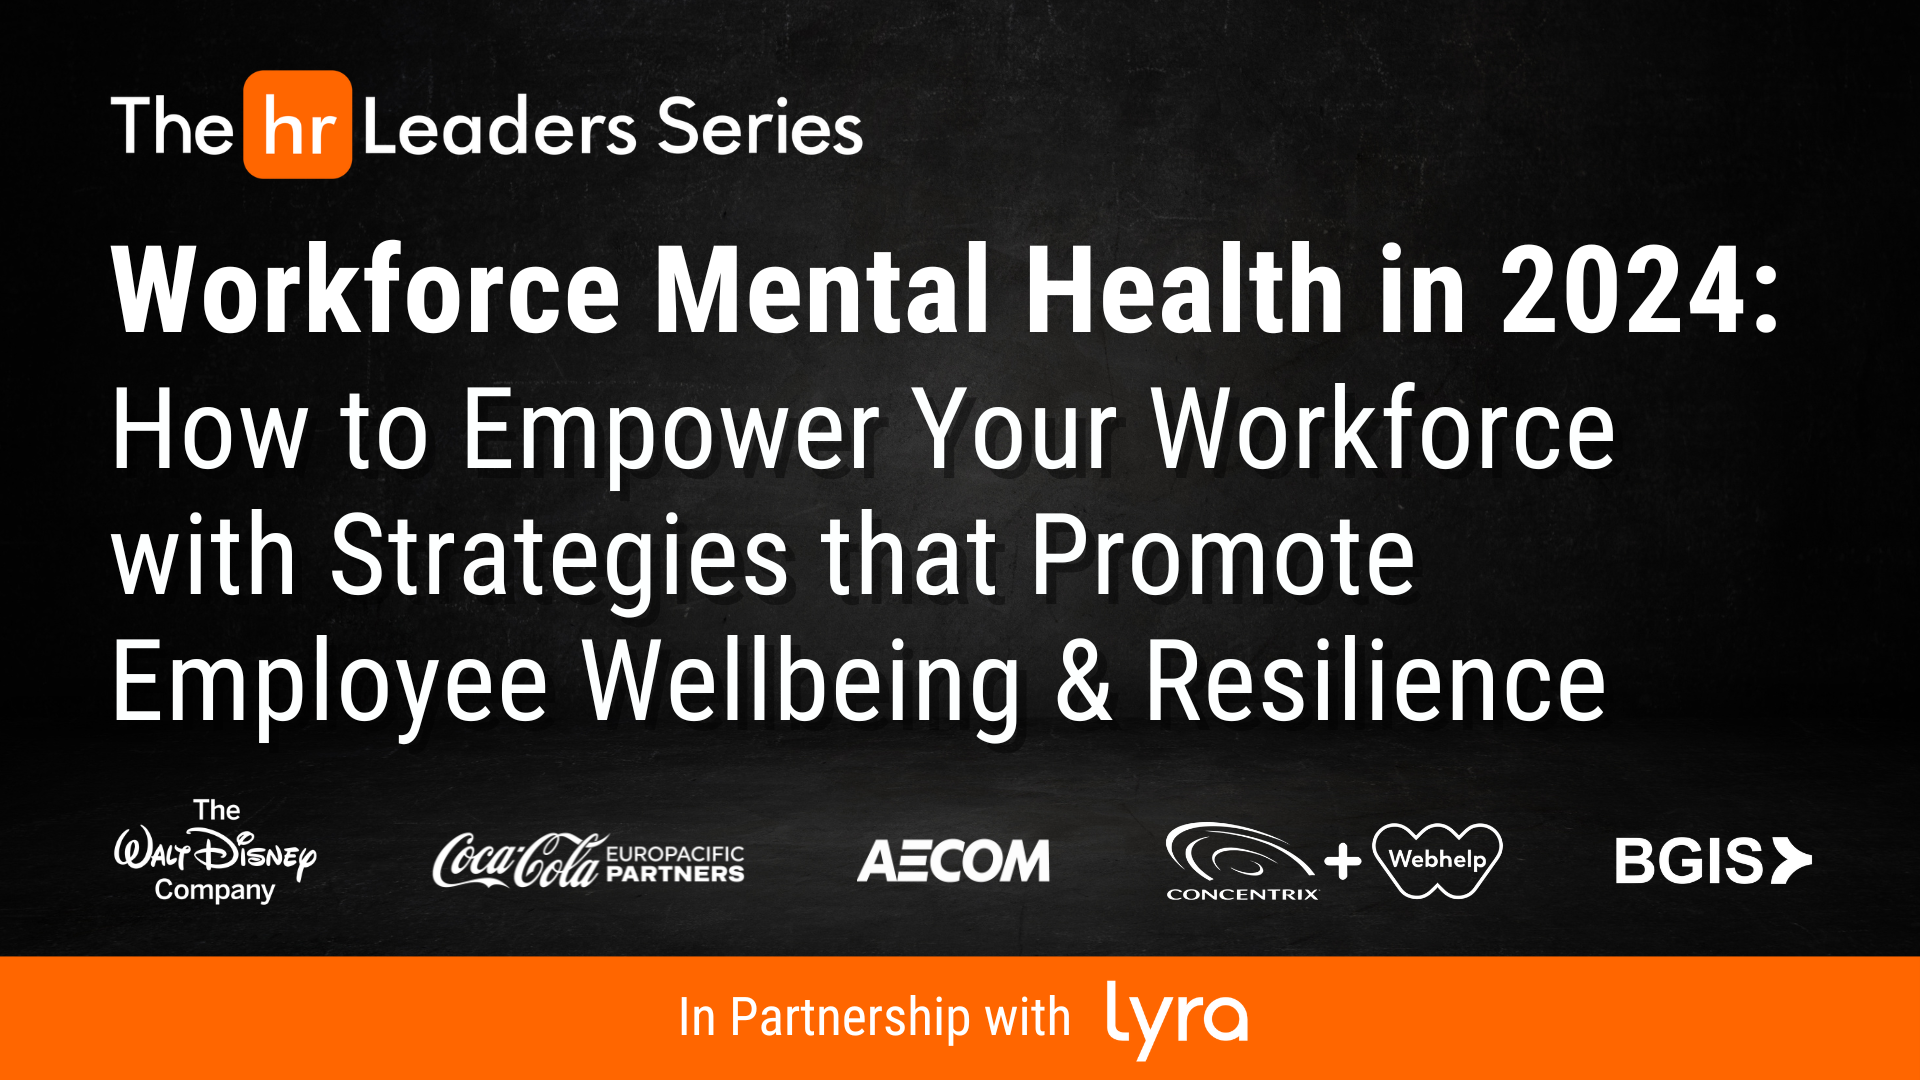 Workforce Mental Health in 2024: How to Empower Your Workforce with Strategies that Promote Employee Wellbeing & Resilience event cover photo